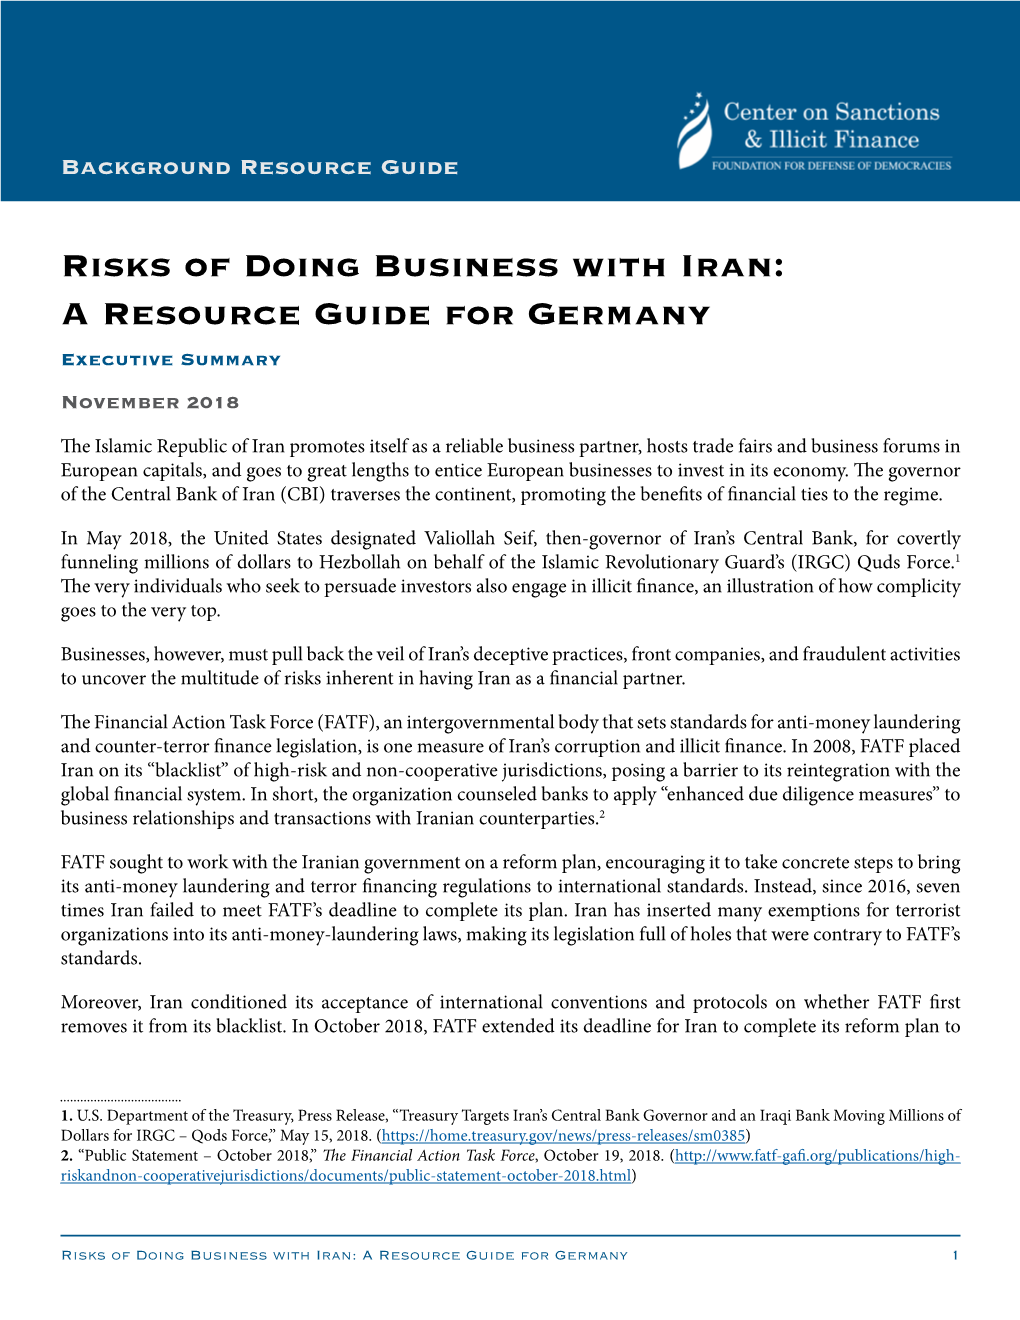 Risks of Doing Business with Iran: a Resource Guide for Germany Executive Summary November 2018